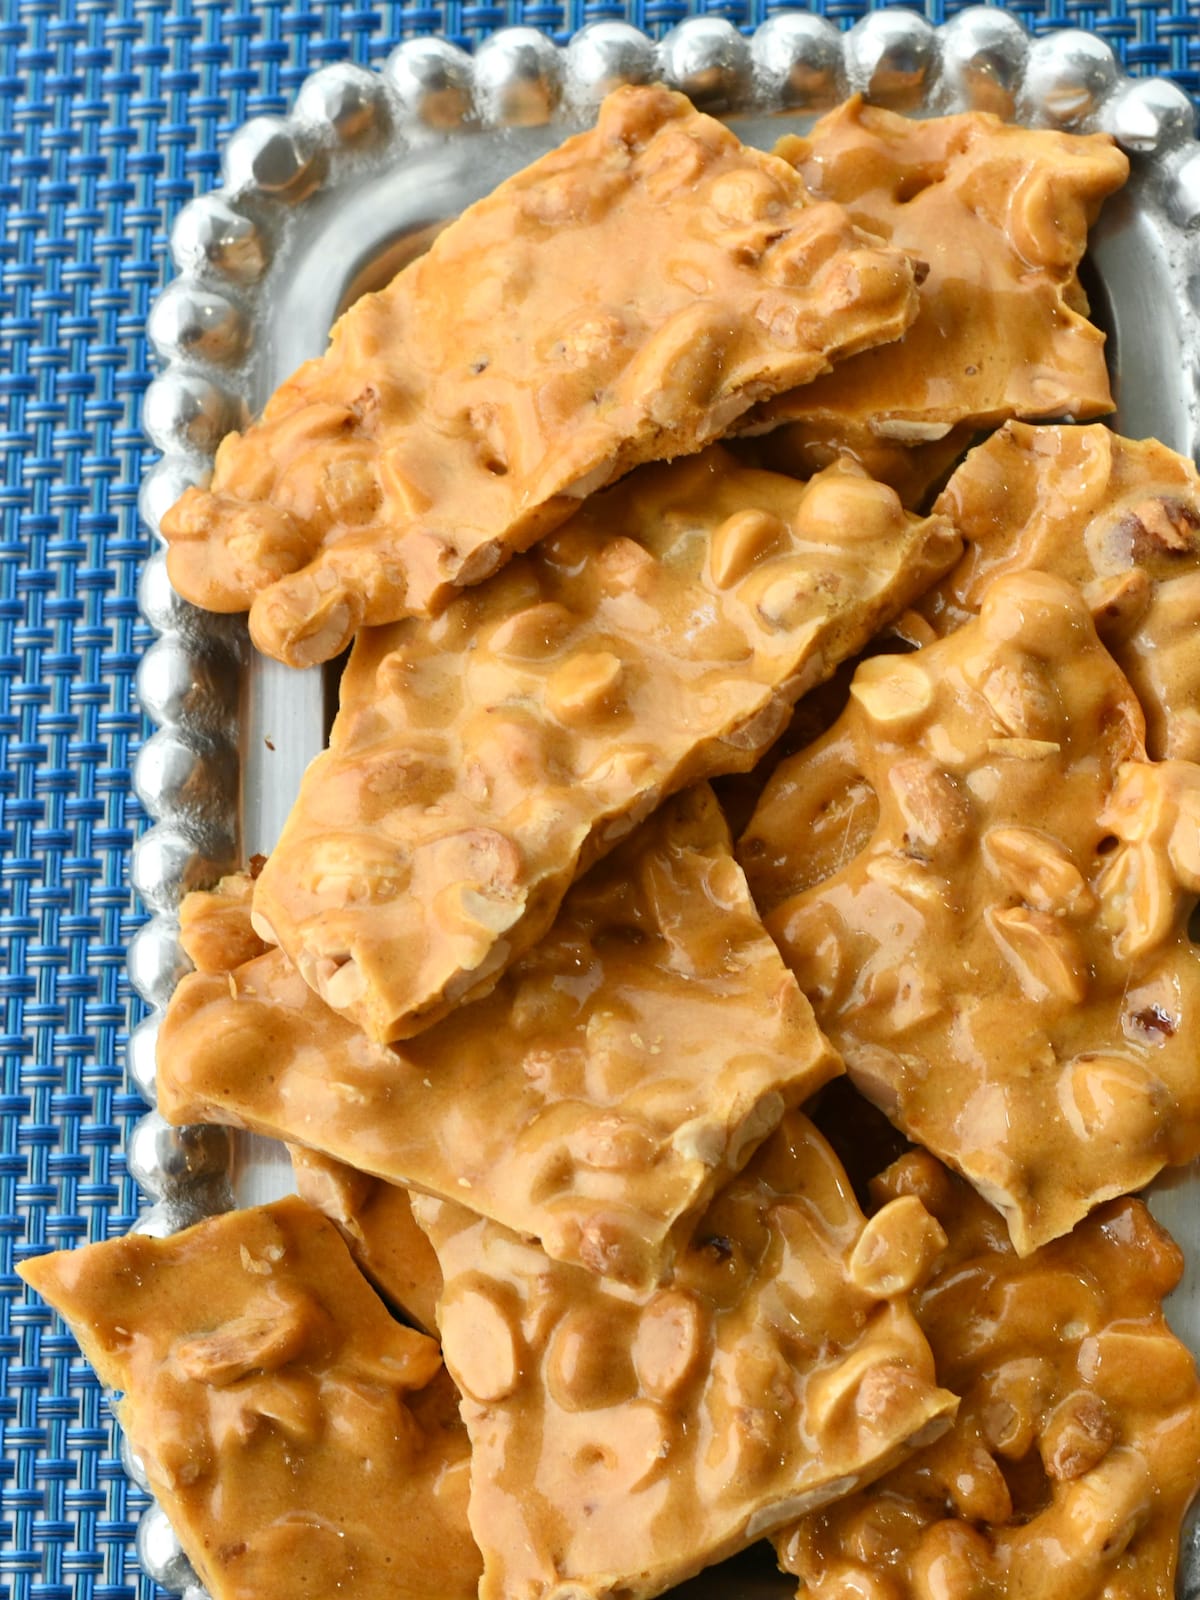 Large pieces of peanut brittle on a silver platter.